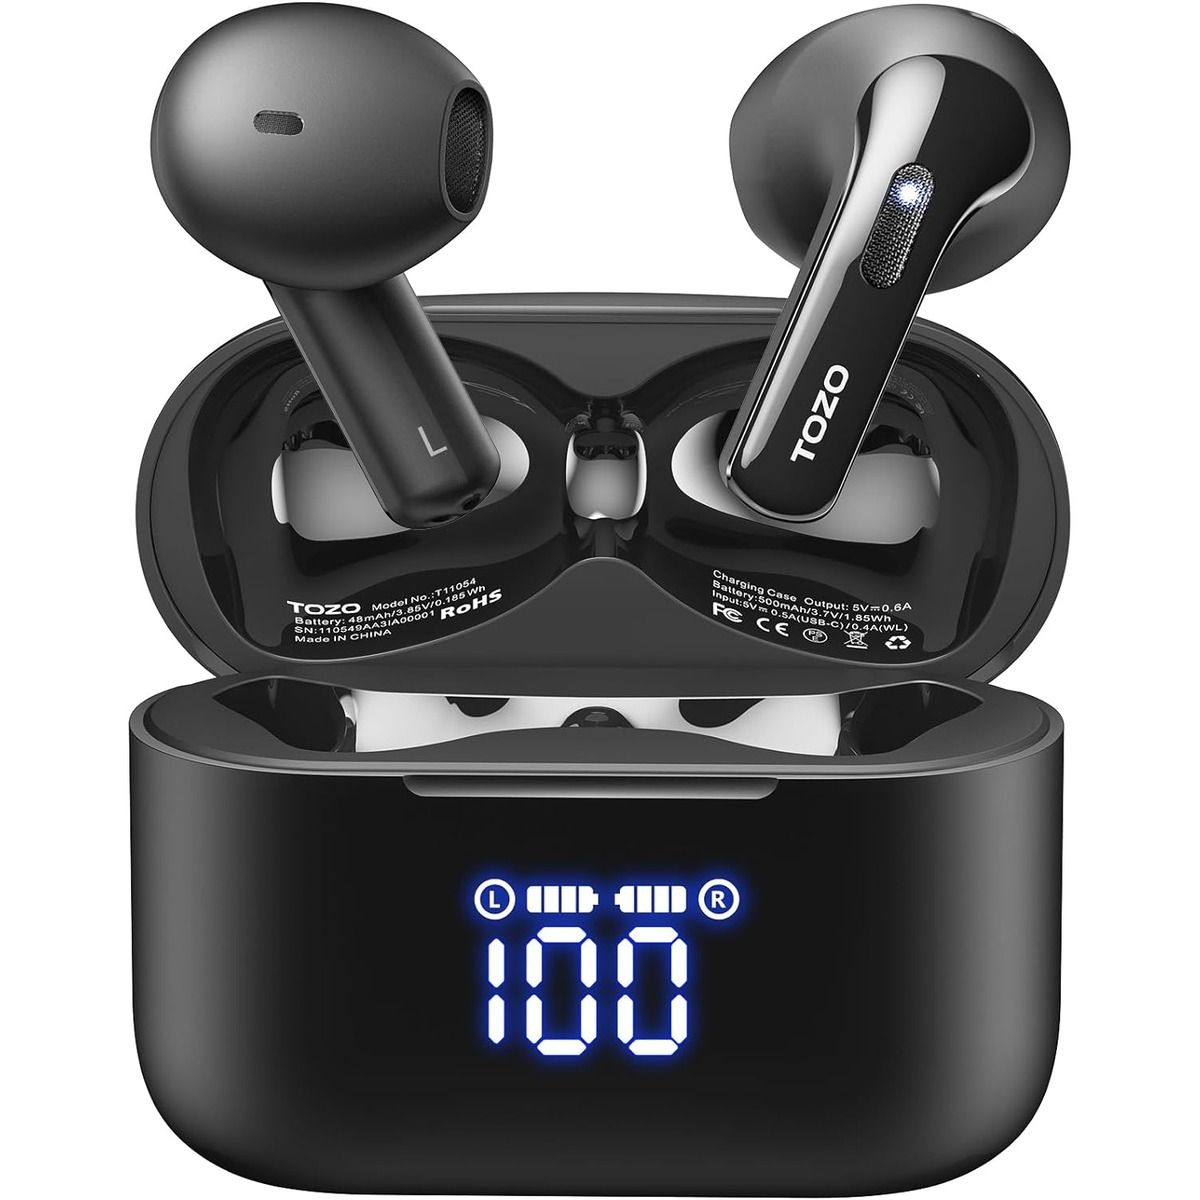 The Best Earbuds For Sleeping